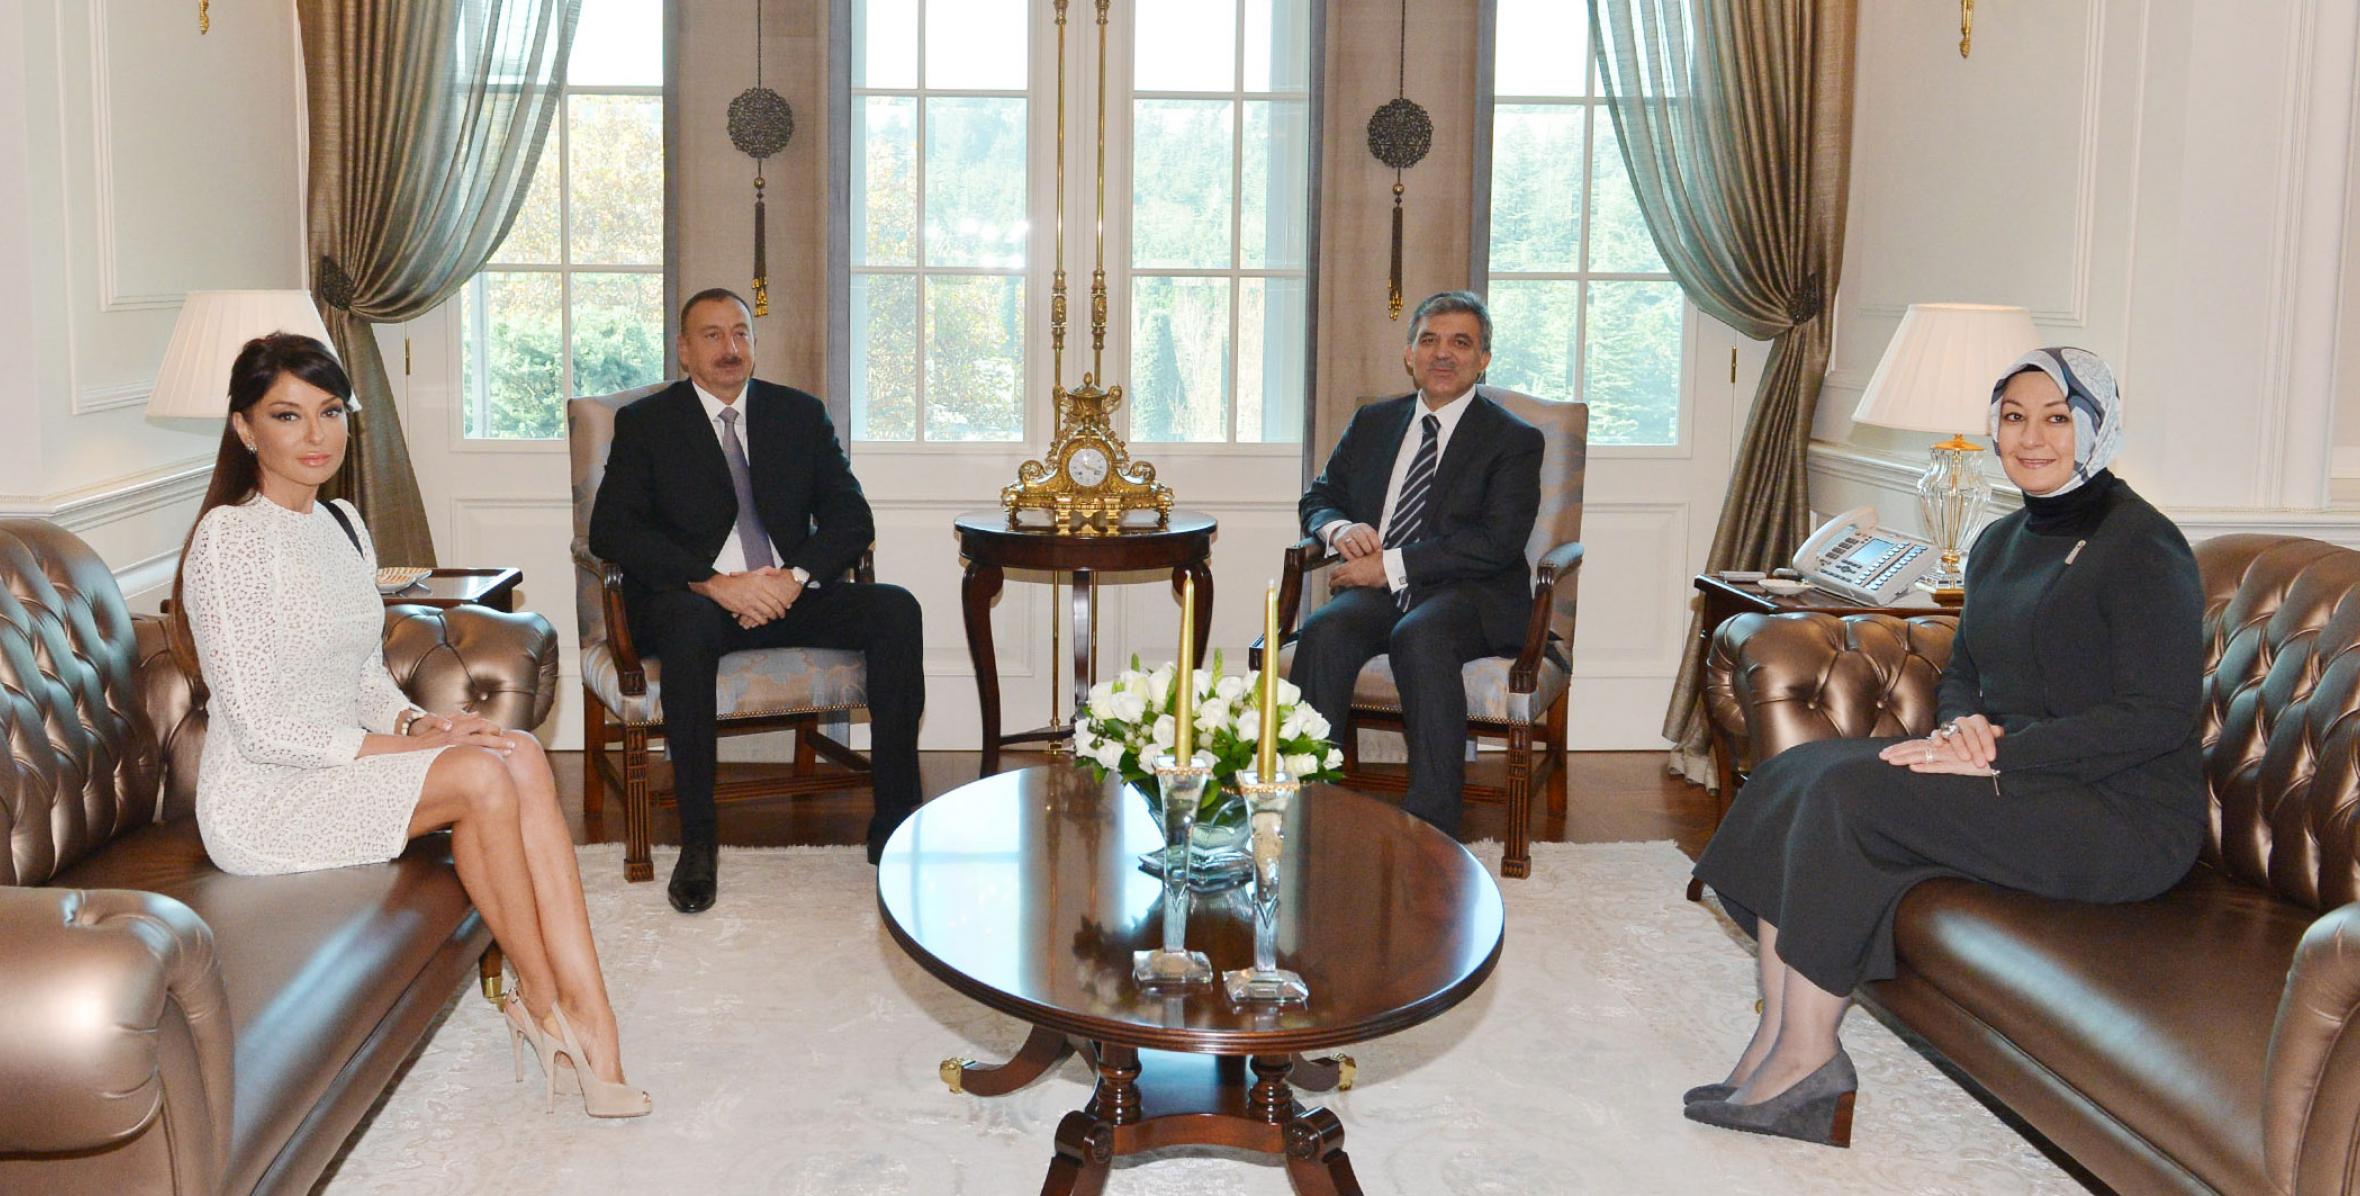 President of Azerbaijan and Turkey had a joint meeting accompanied by their spouses